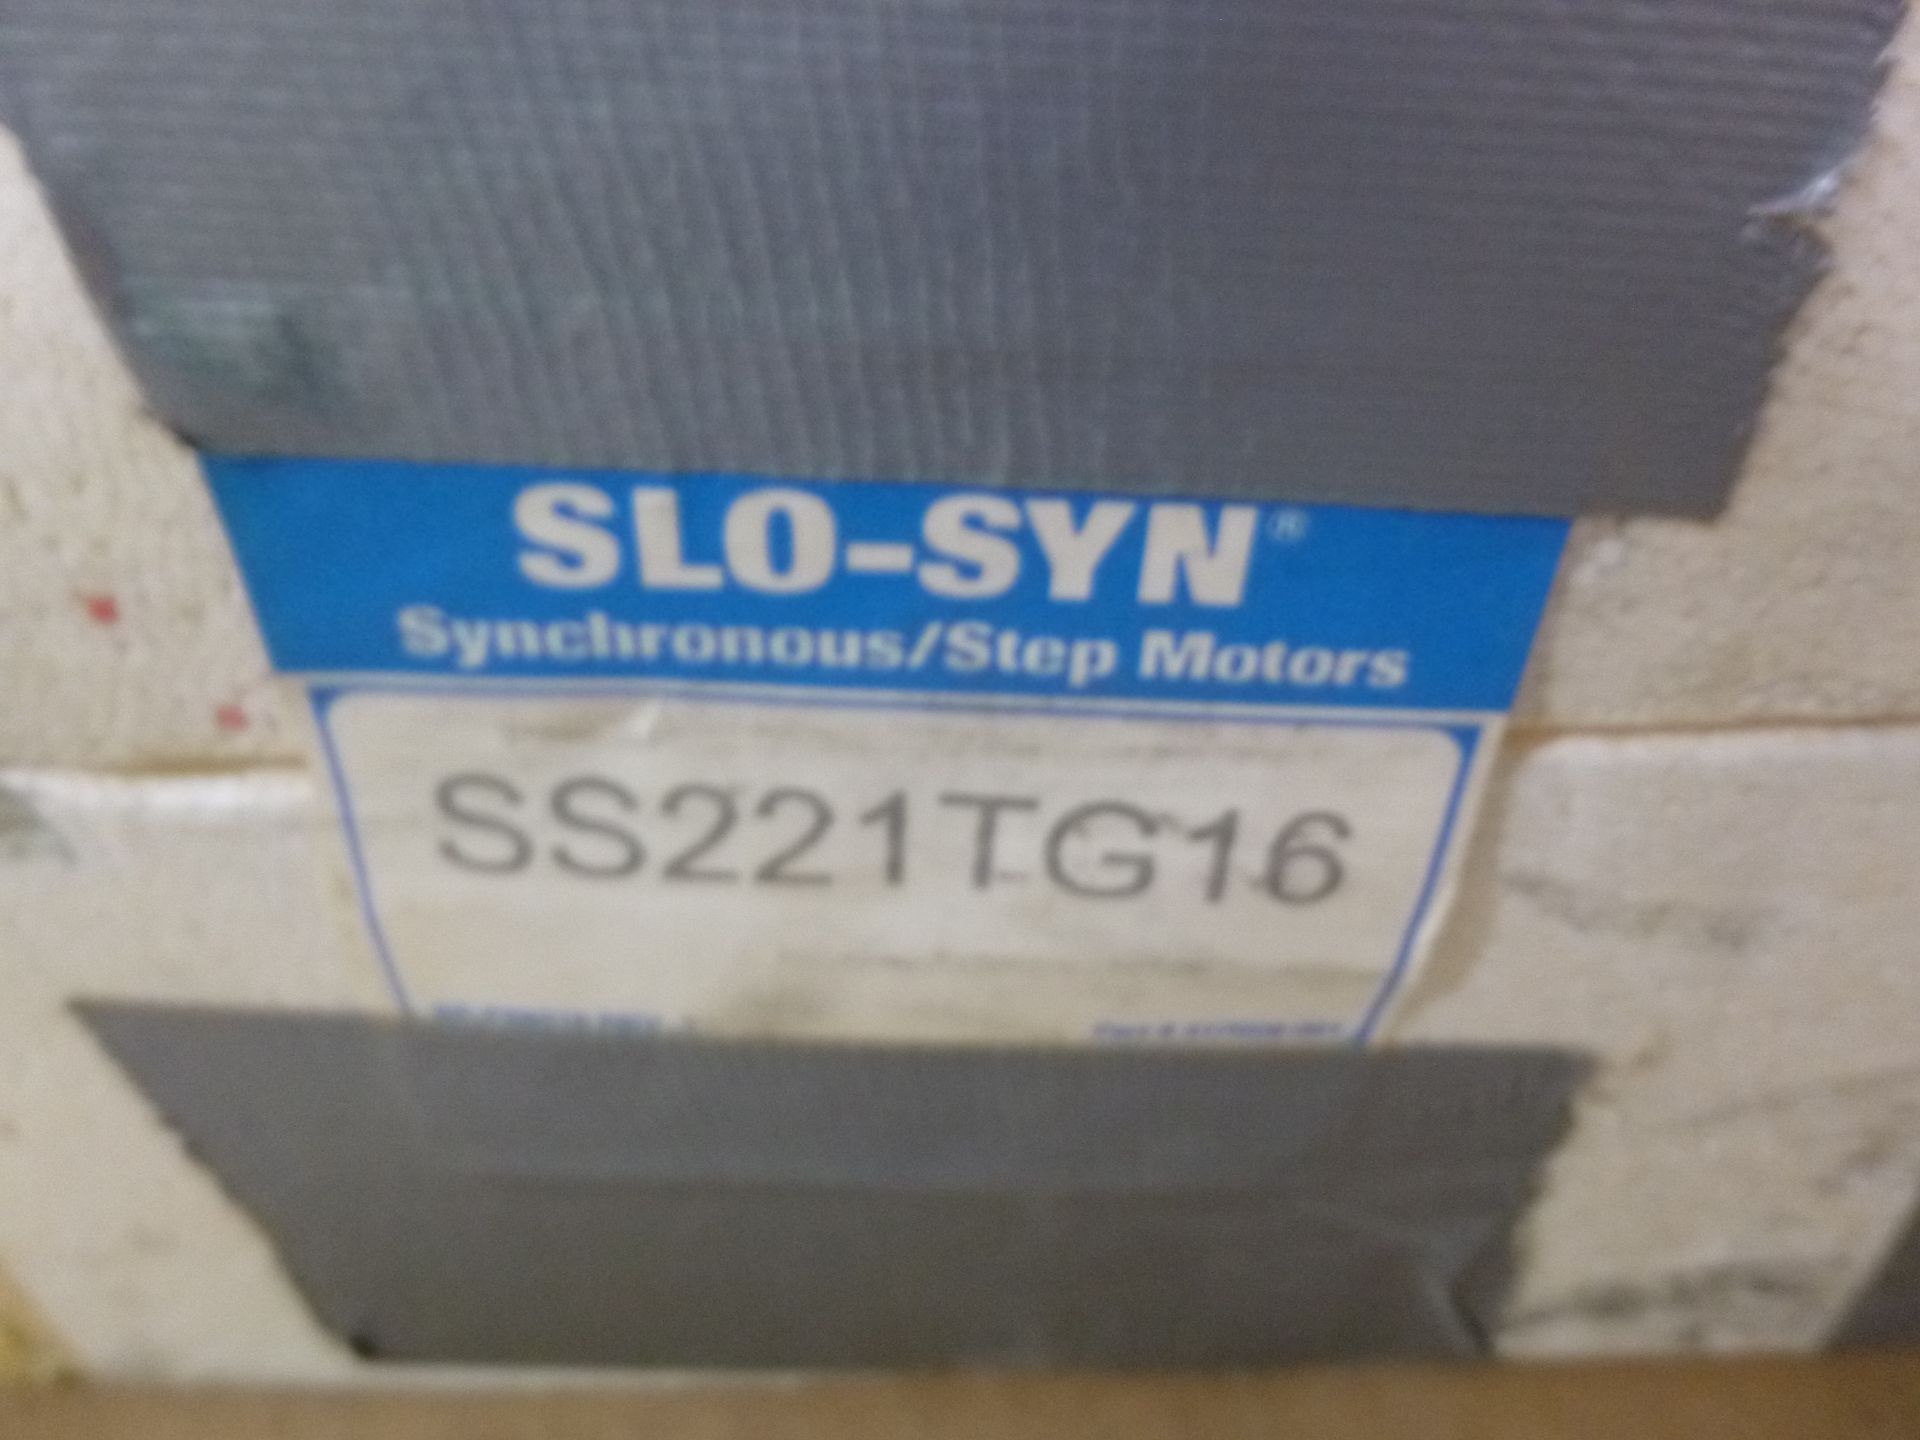 Slo-Syn Synchronous/stepping motors type SS221TG16, new in packaging as pictured, as always with - Image 2 of 2